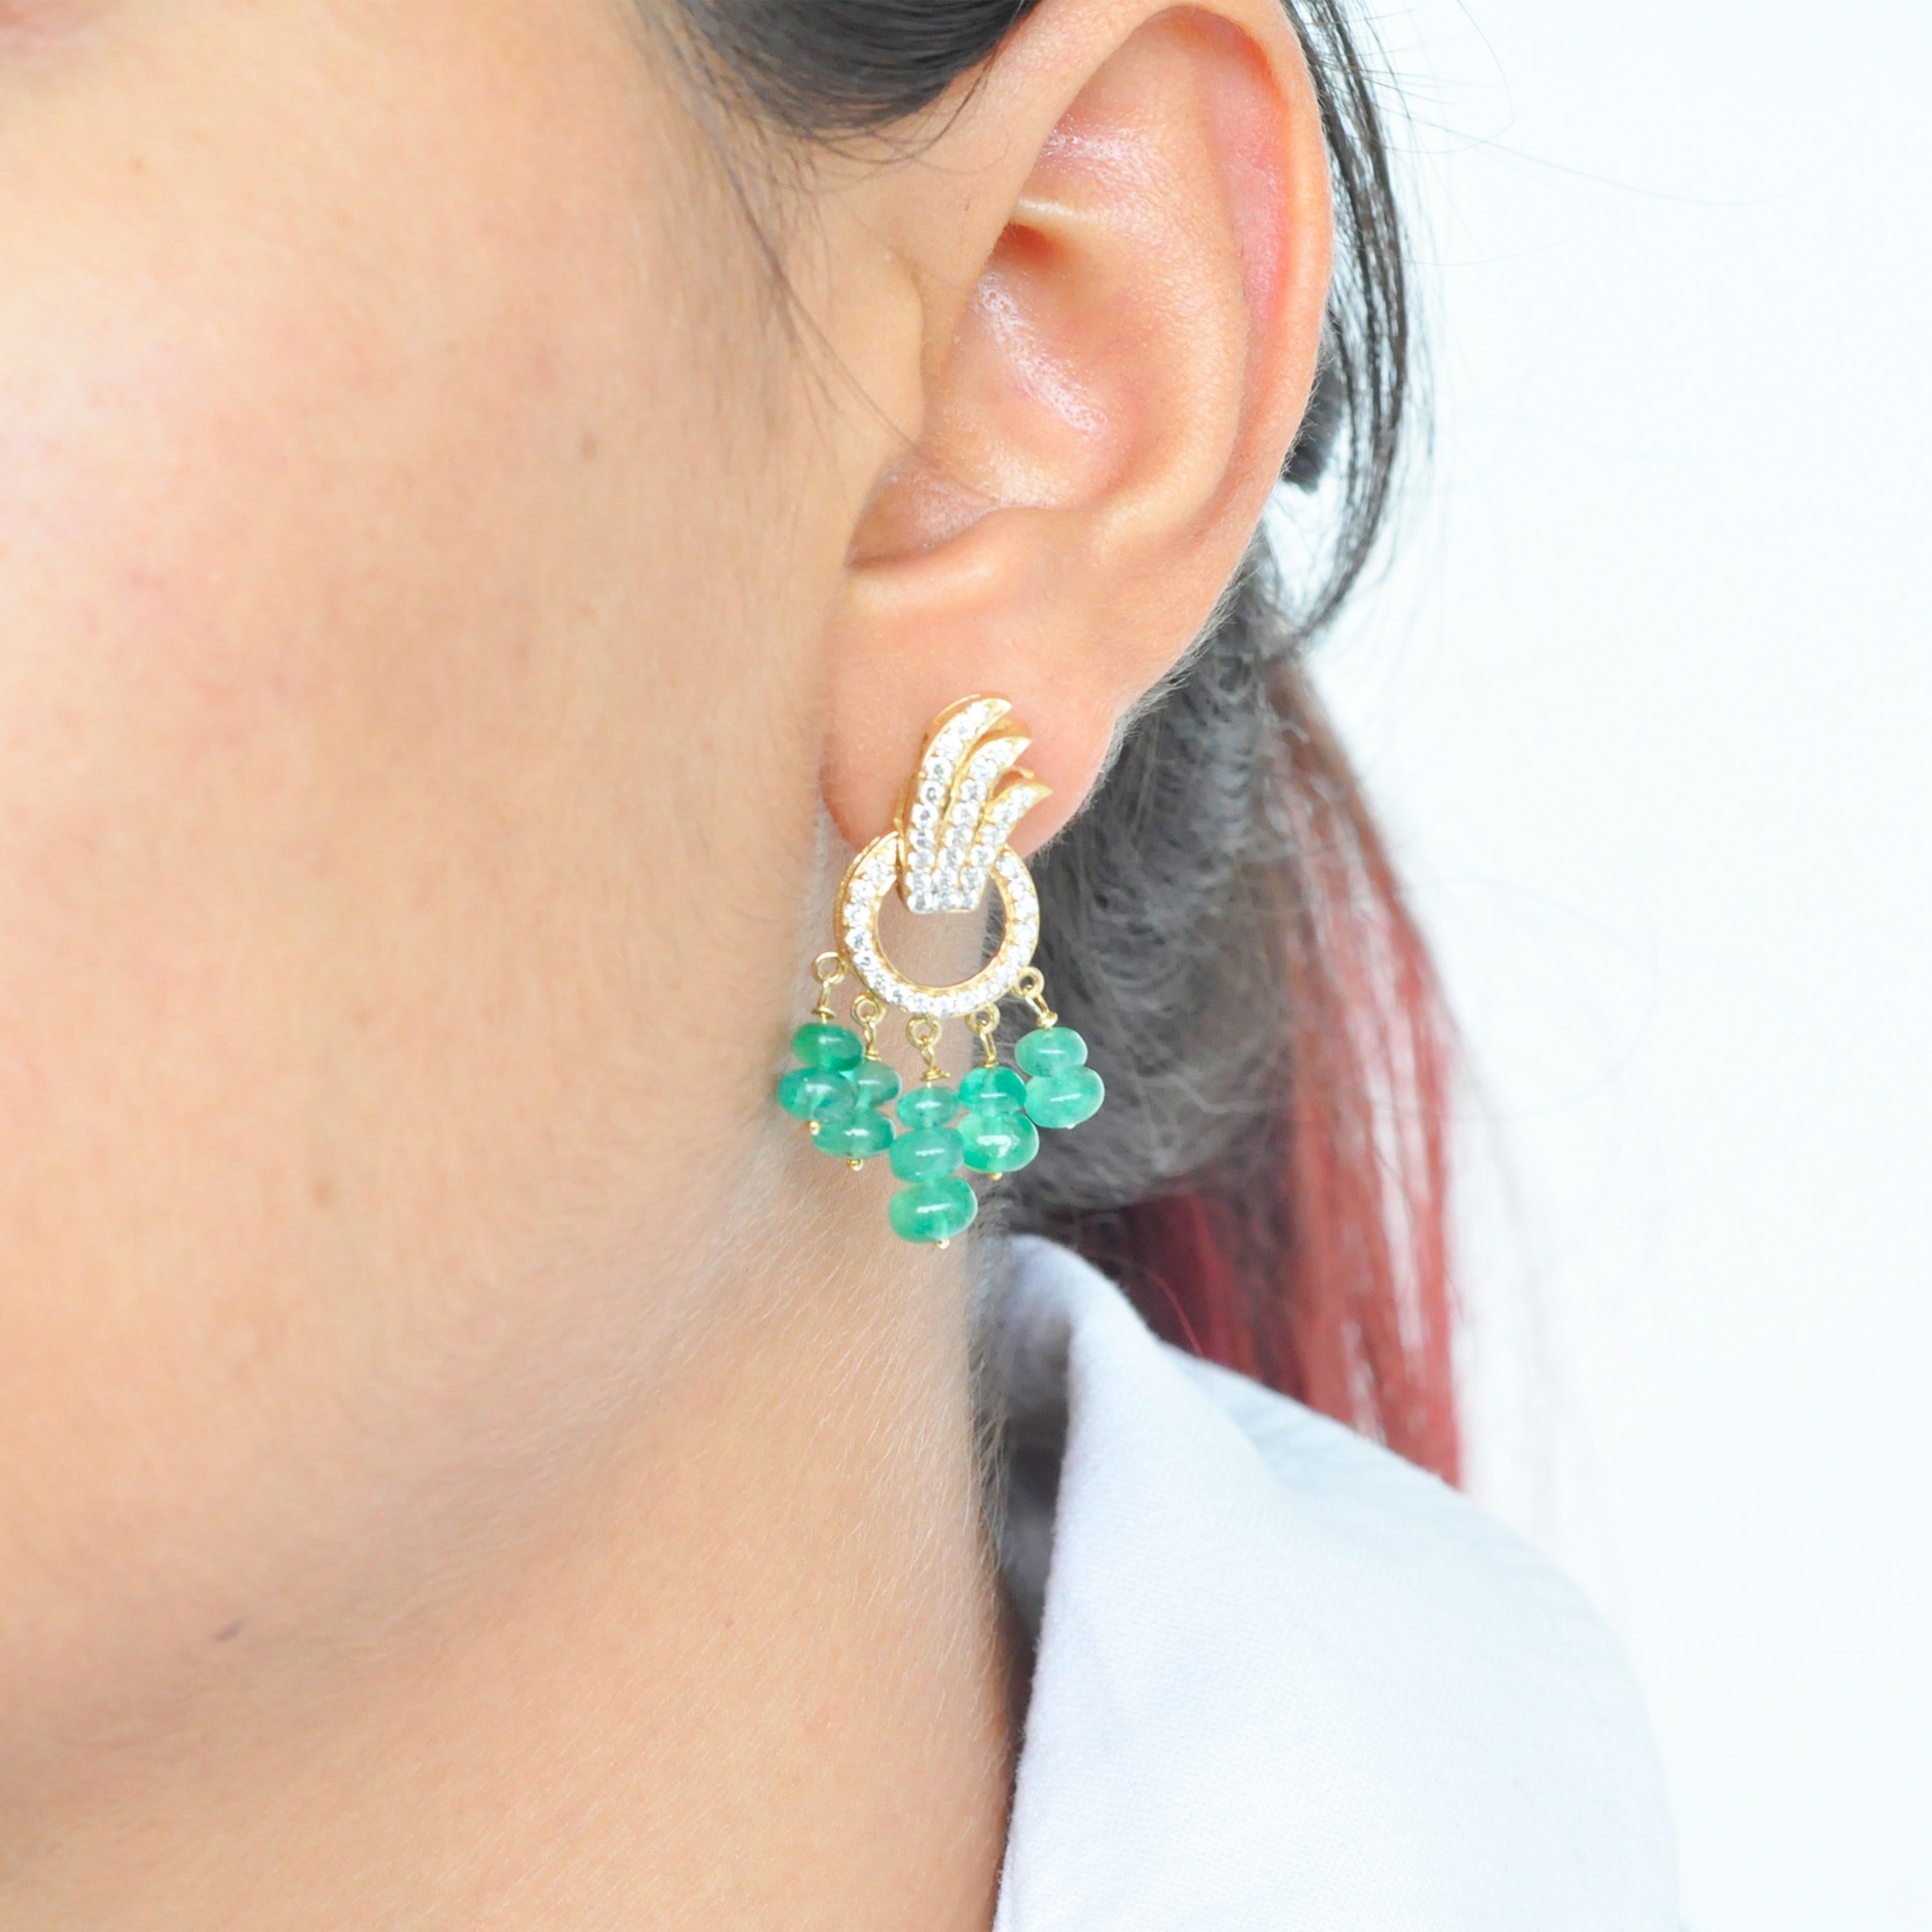 18 karat yellow gold diamond emerald beads dangle earrings

These 18 karat gold dangle earrings are a contemporary beauty. The earrings depicts three diamond feathers encircled by a diamond ring. A touch of green added by the hanging lustrous